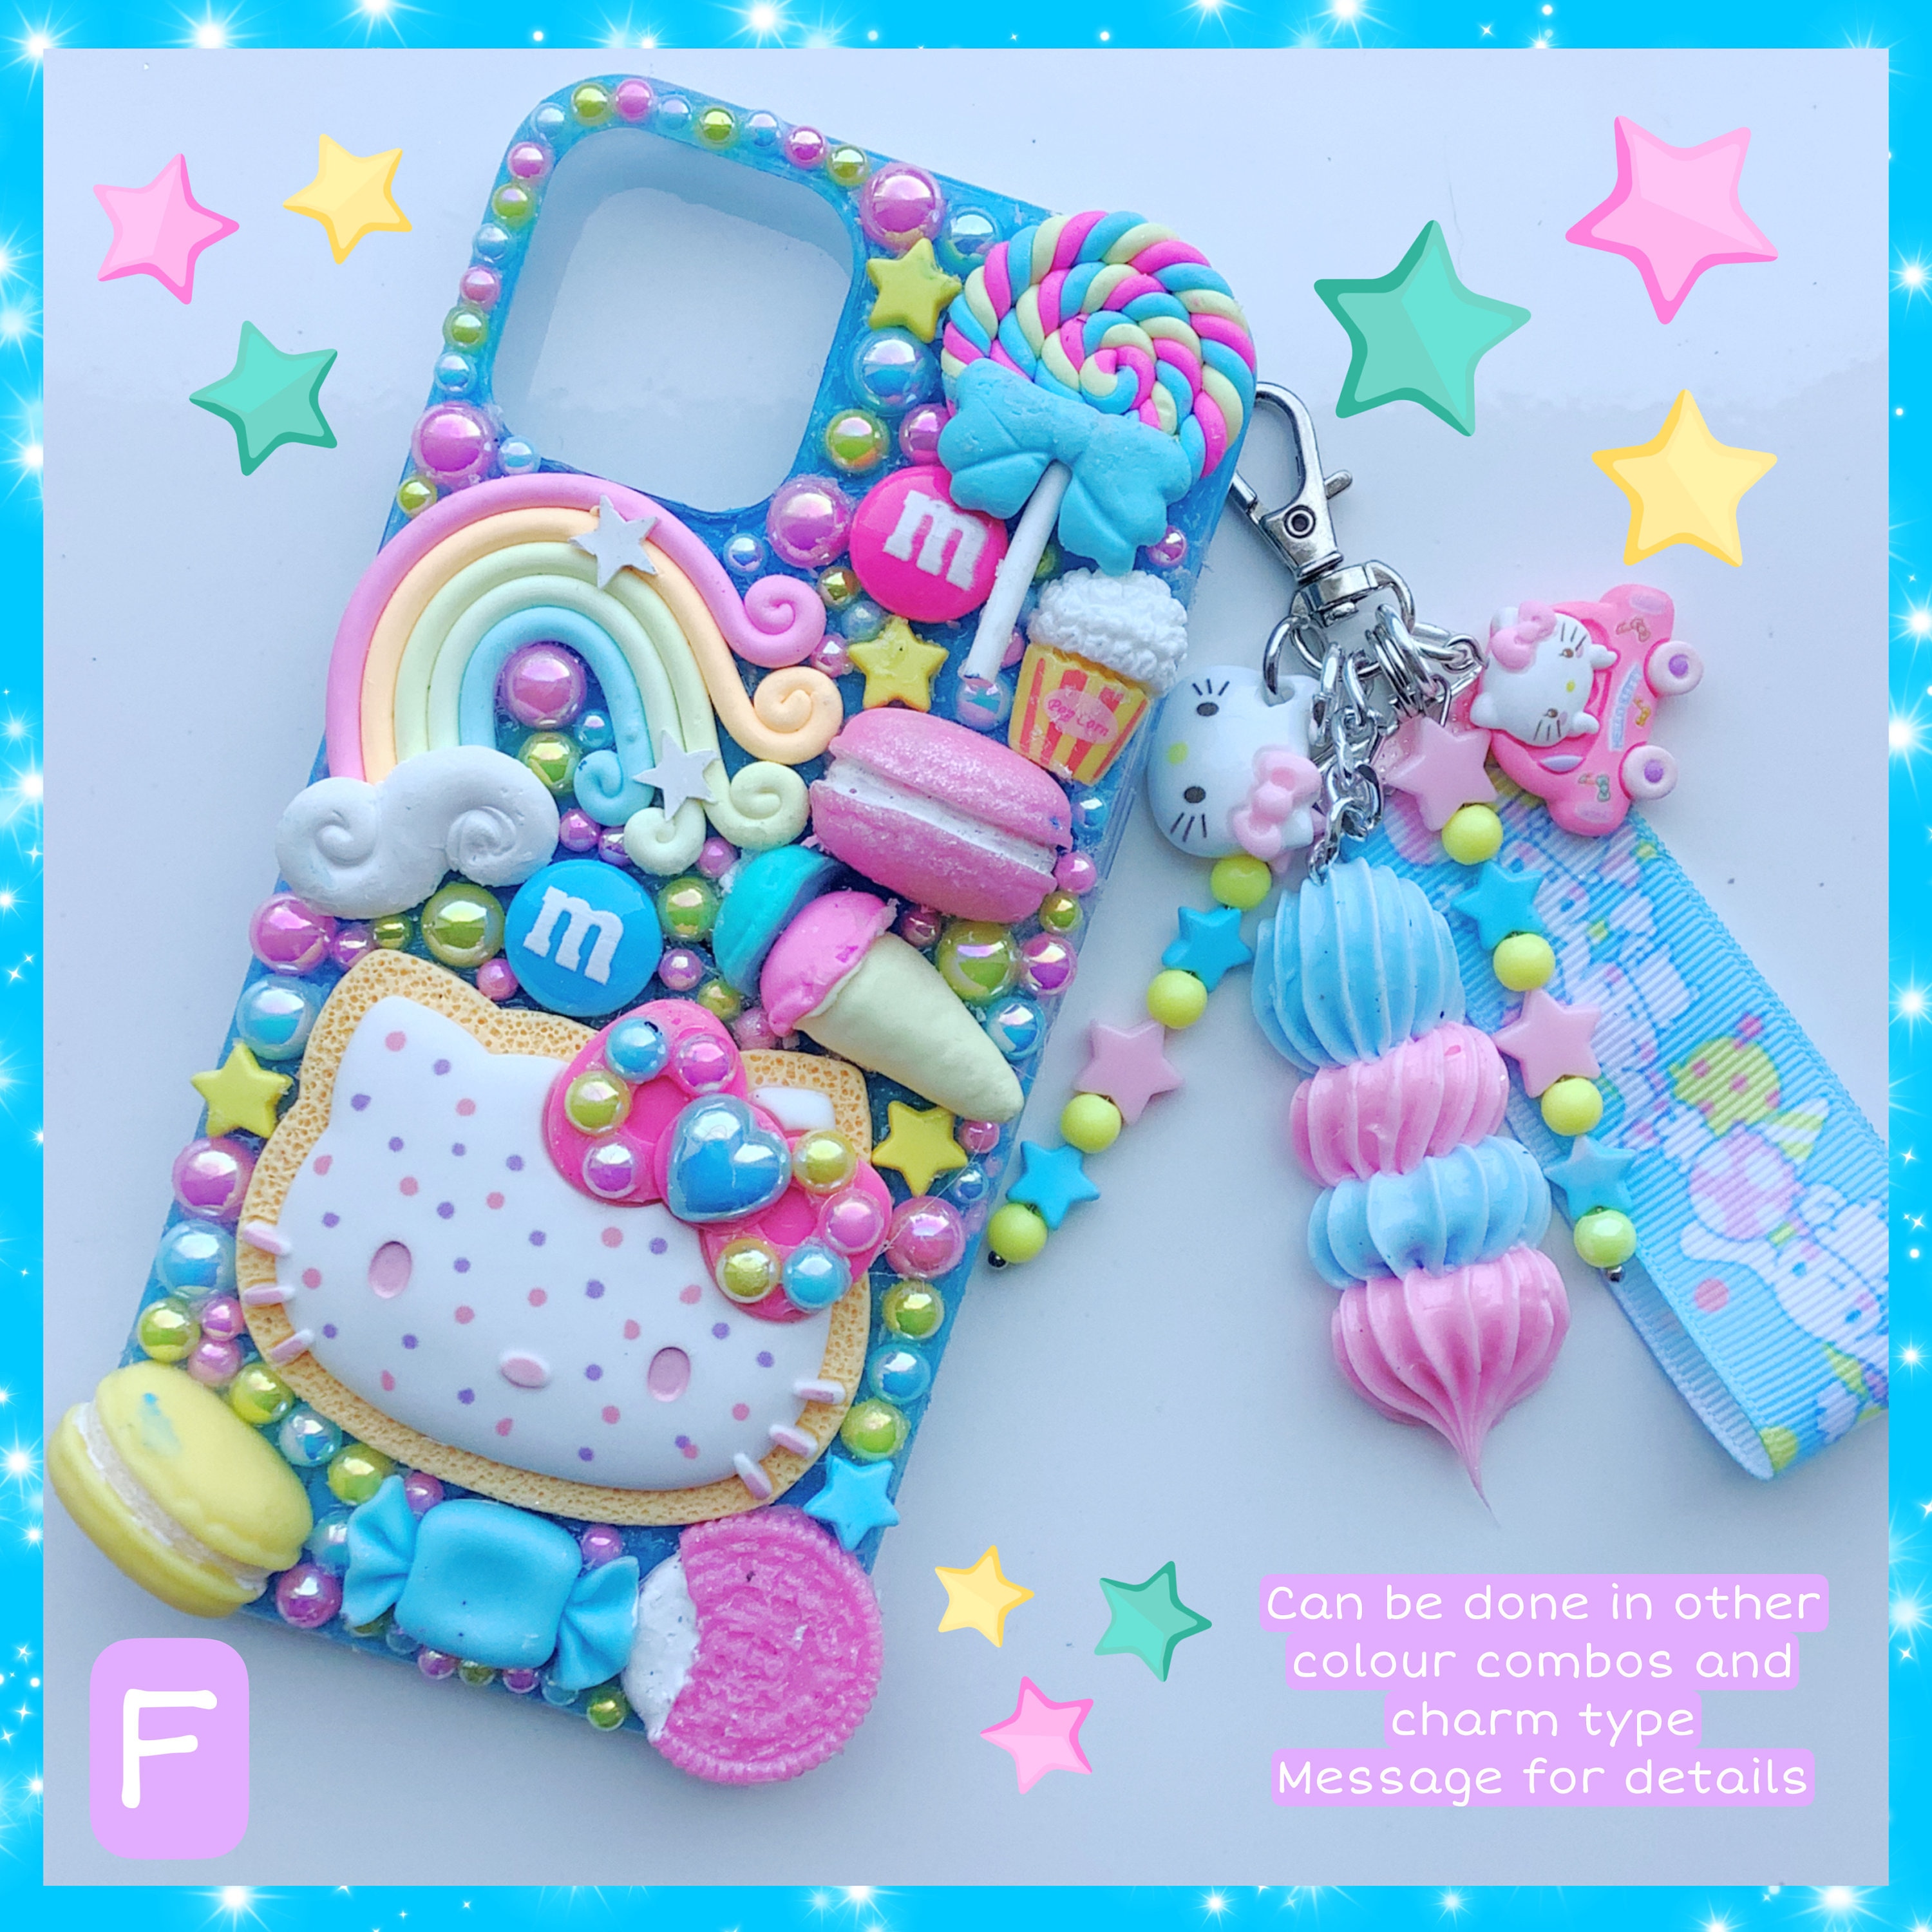 kawaii cute handmade unique decoden pink phone case with charms iphone 11